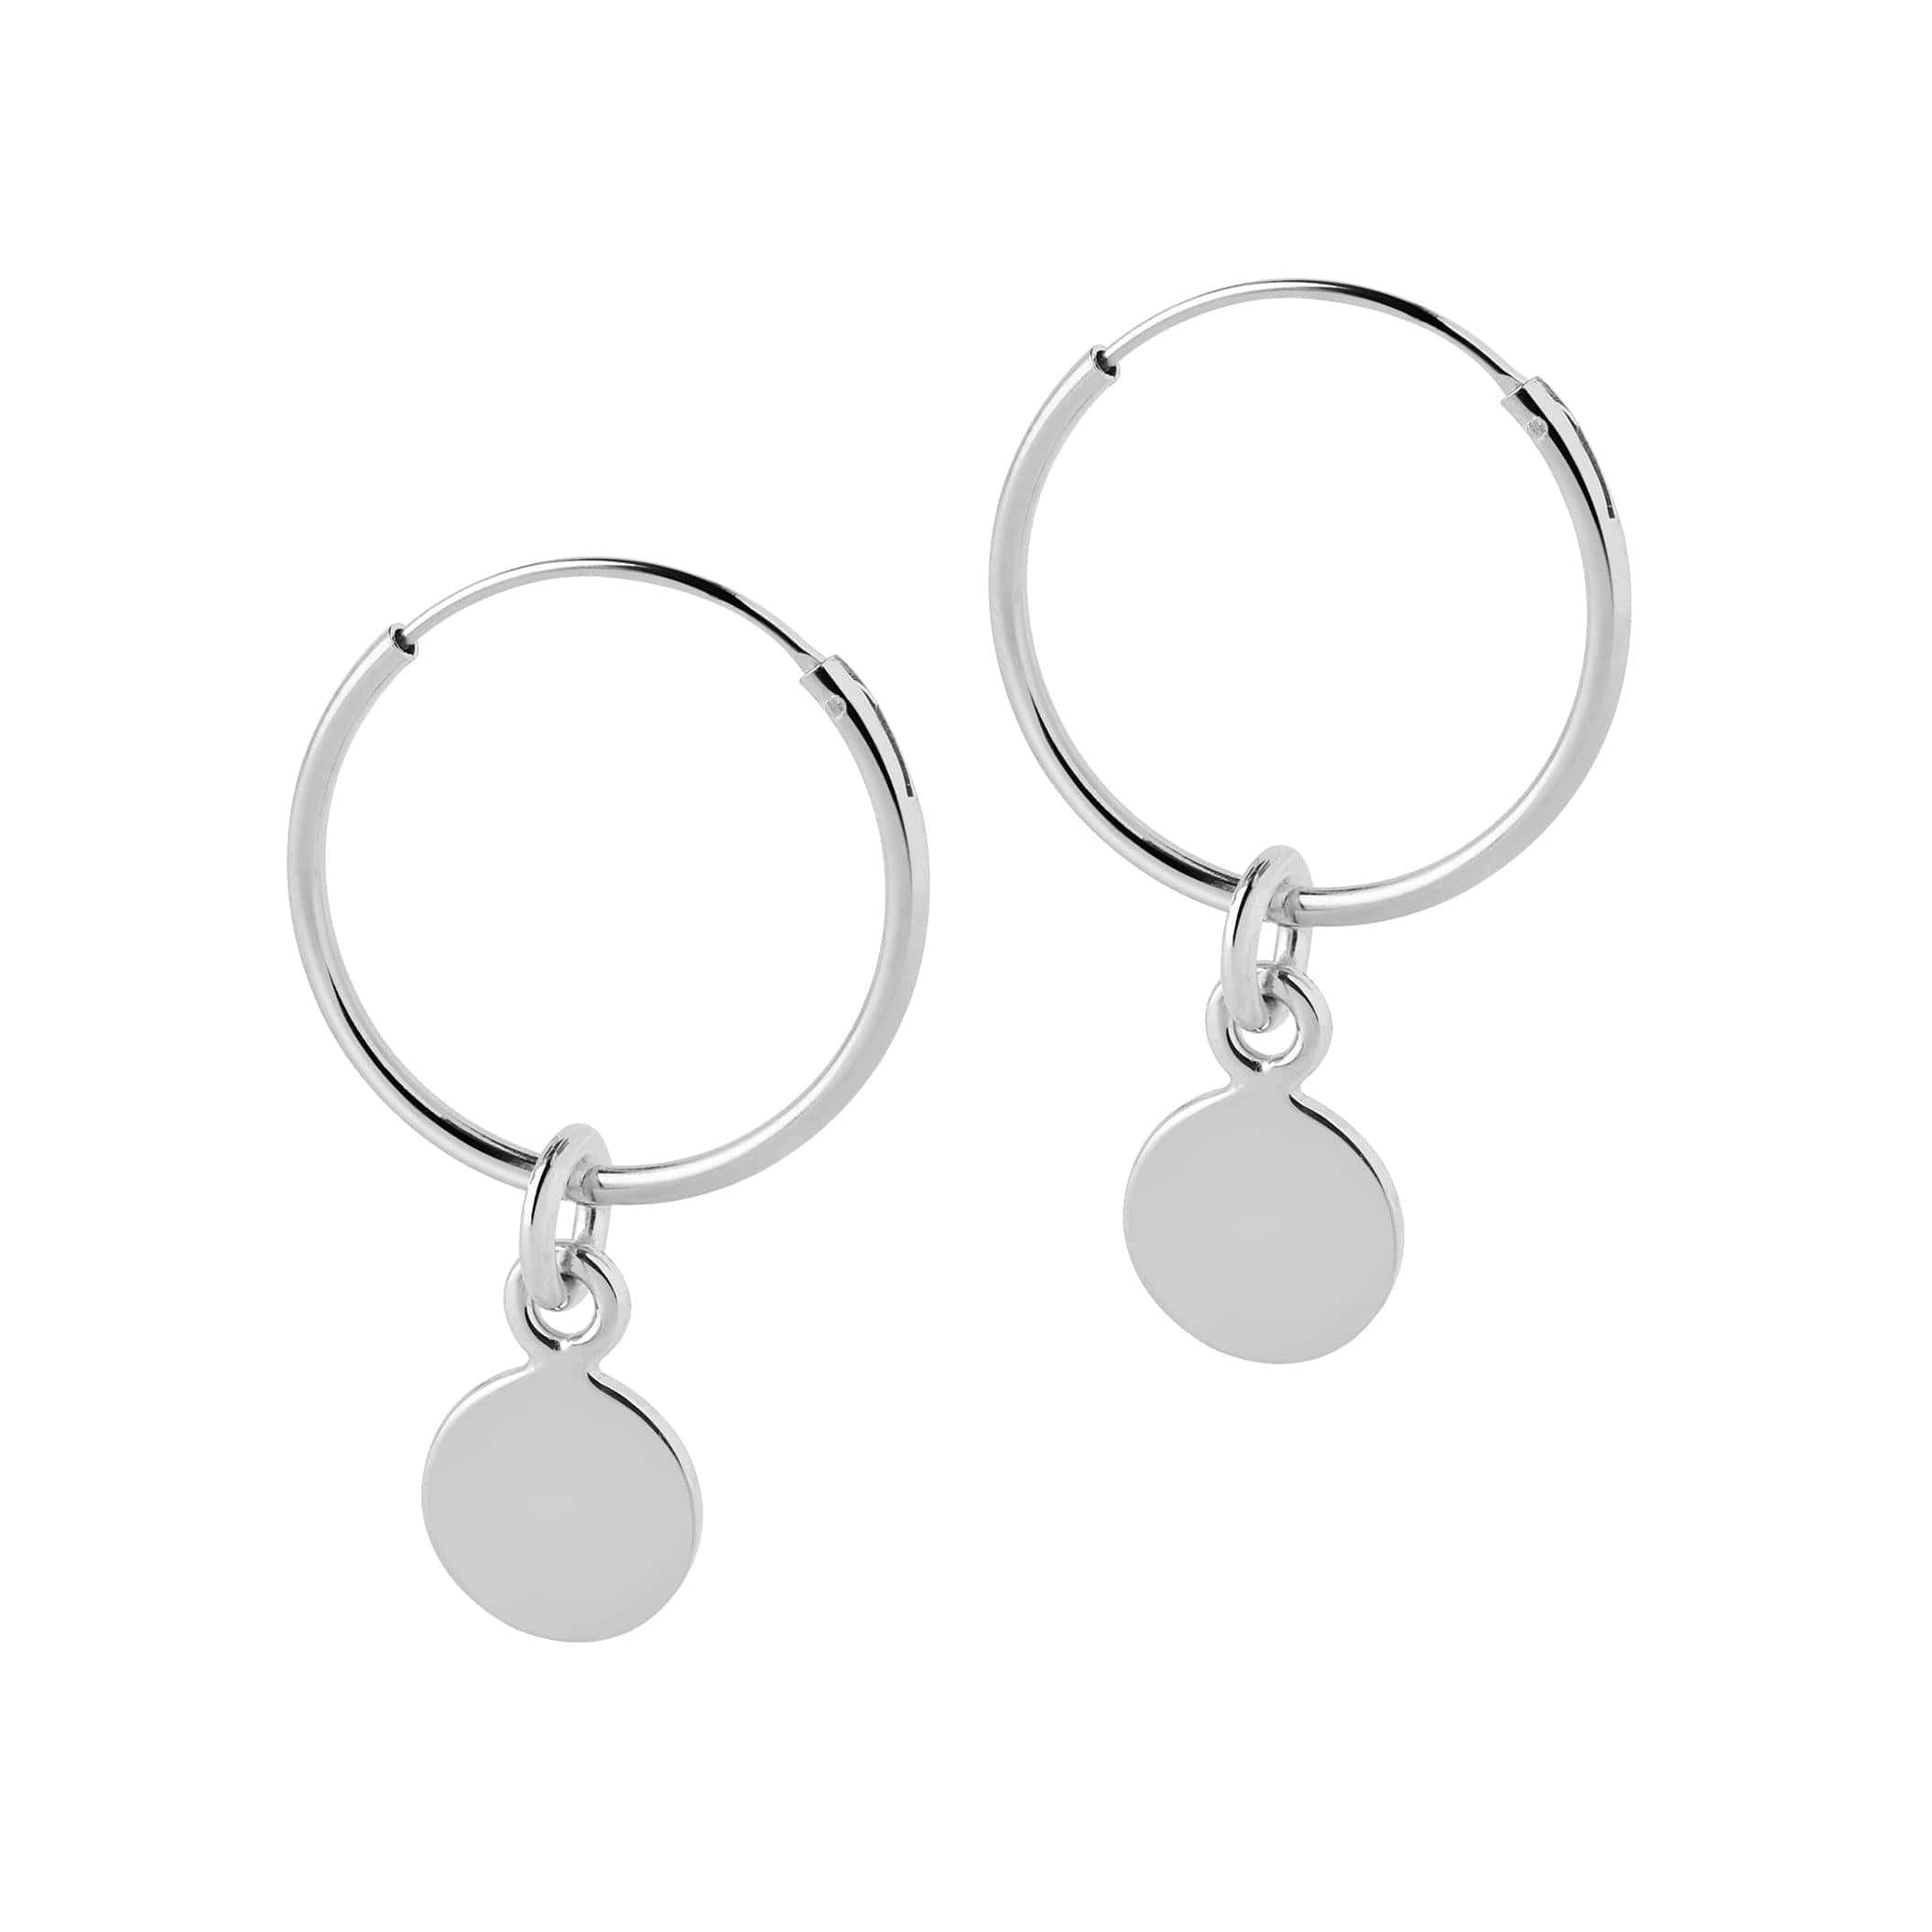 18 mm silver hoop earrings with round pendant